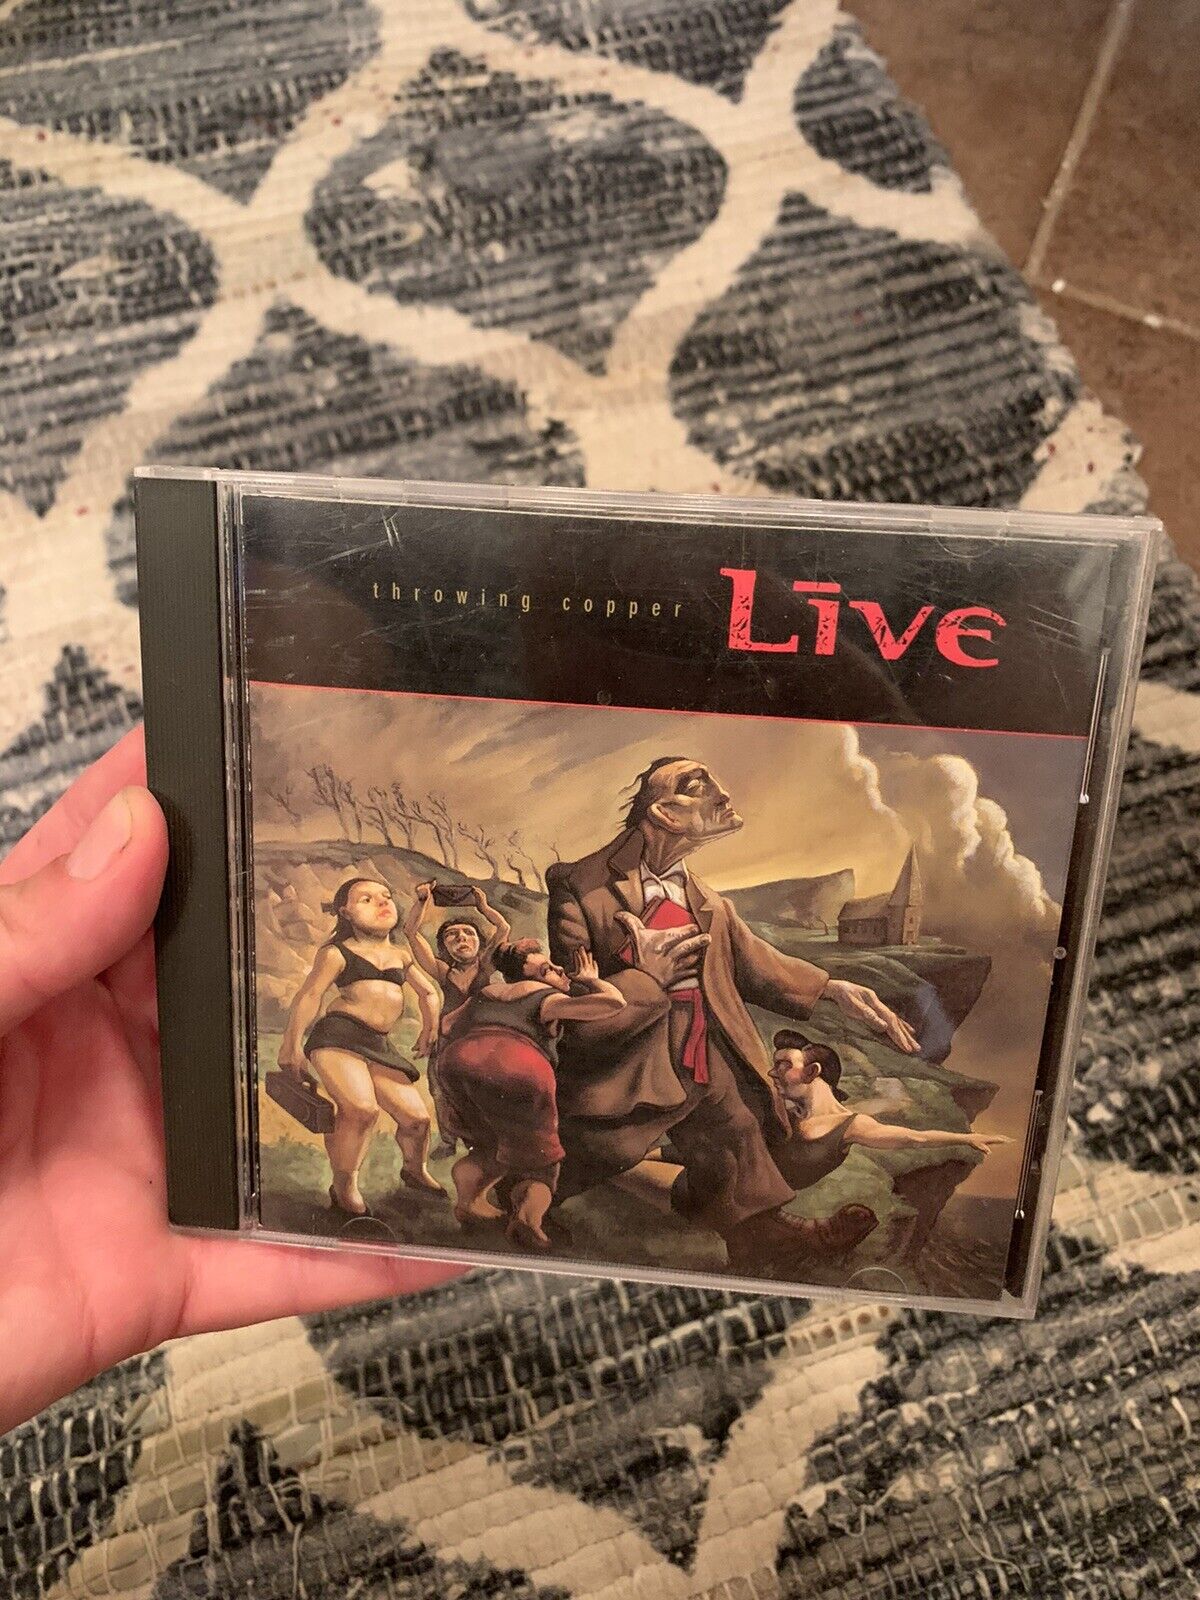 VINTAGE 1995 Live Throwing Copper Audio CD rard-10997 Green Radioactive Records